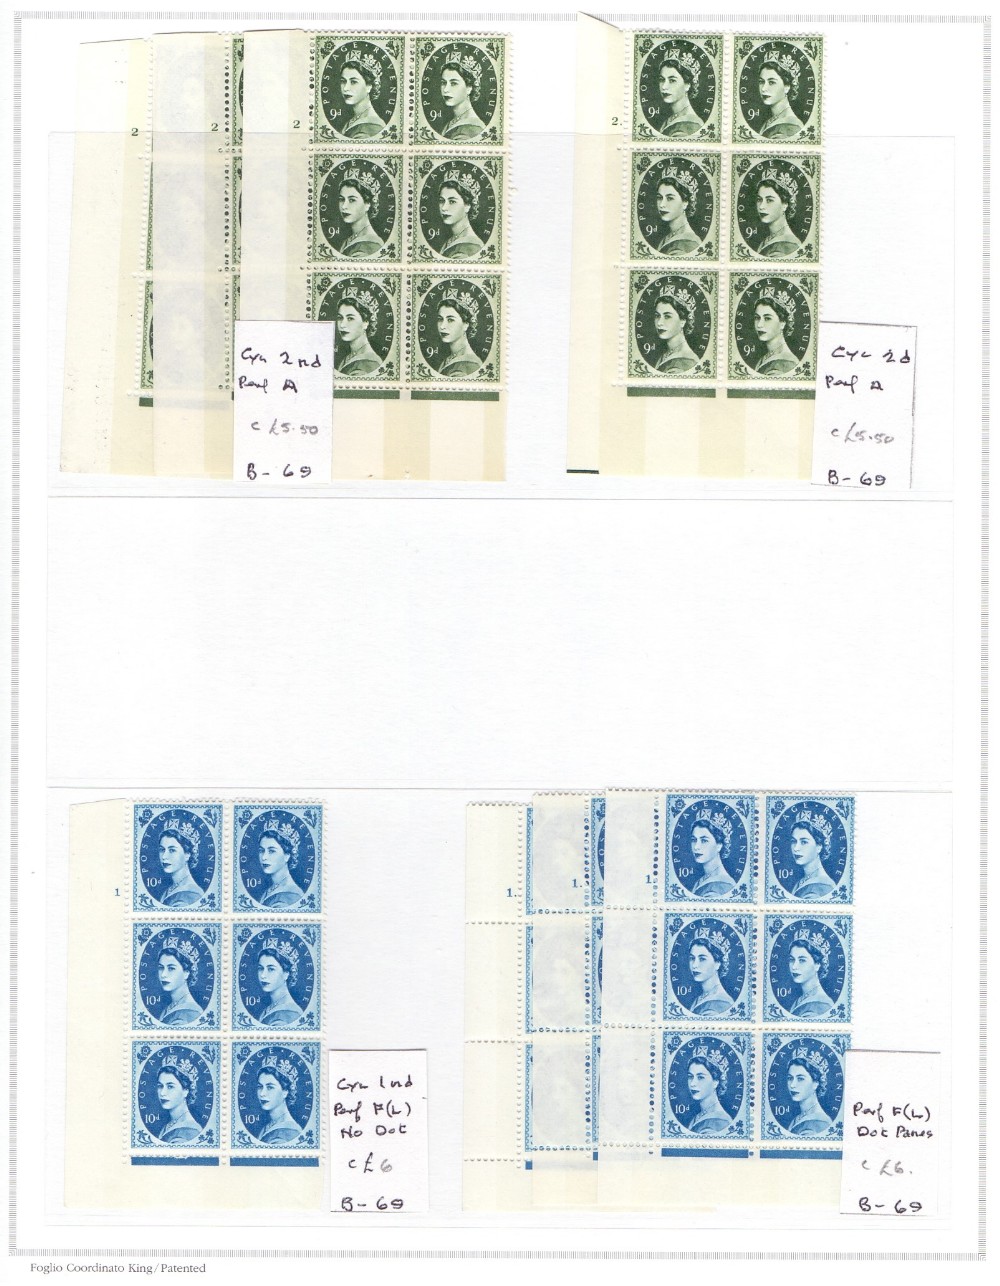 GREAT BRITAIN STAMPS : Wilding Collection, mint cylinder blocks, coils, singles, - Image 11 of 18